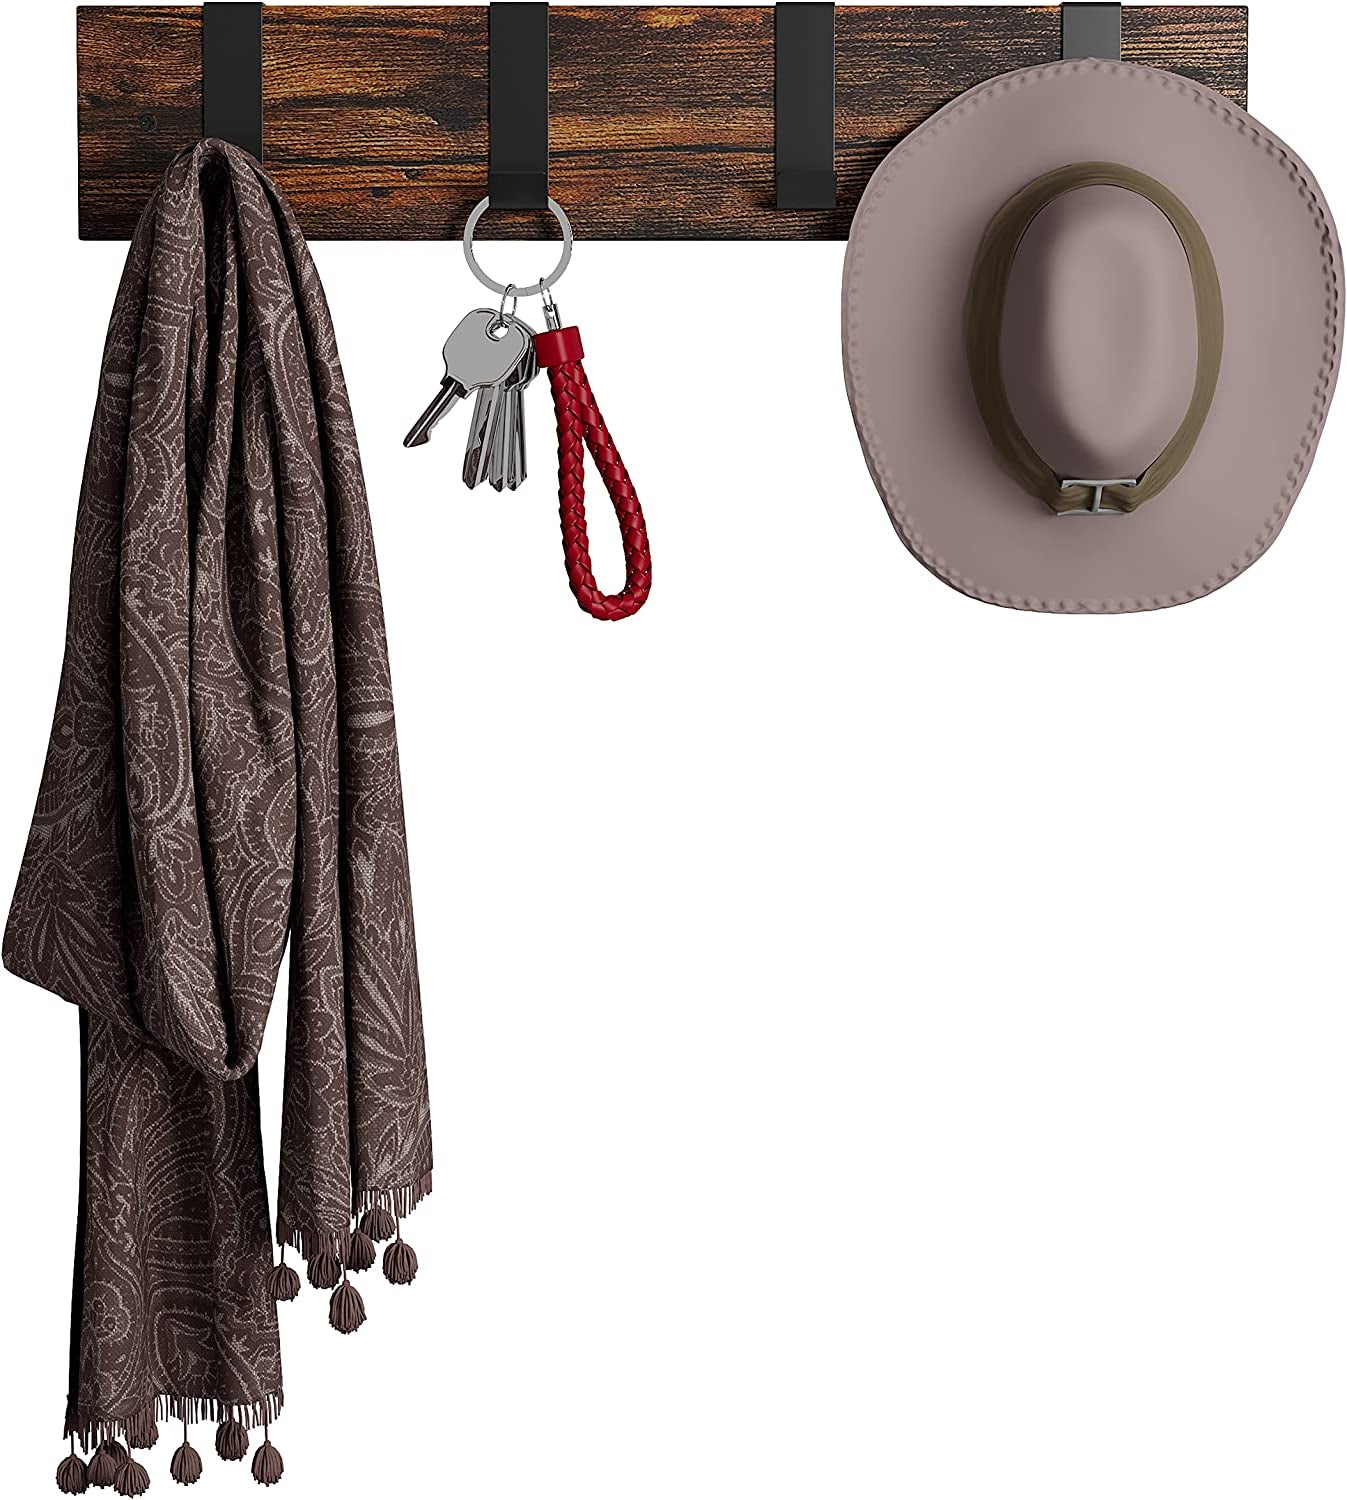 Mounted Hanging Rack with 4 Hooks